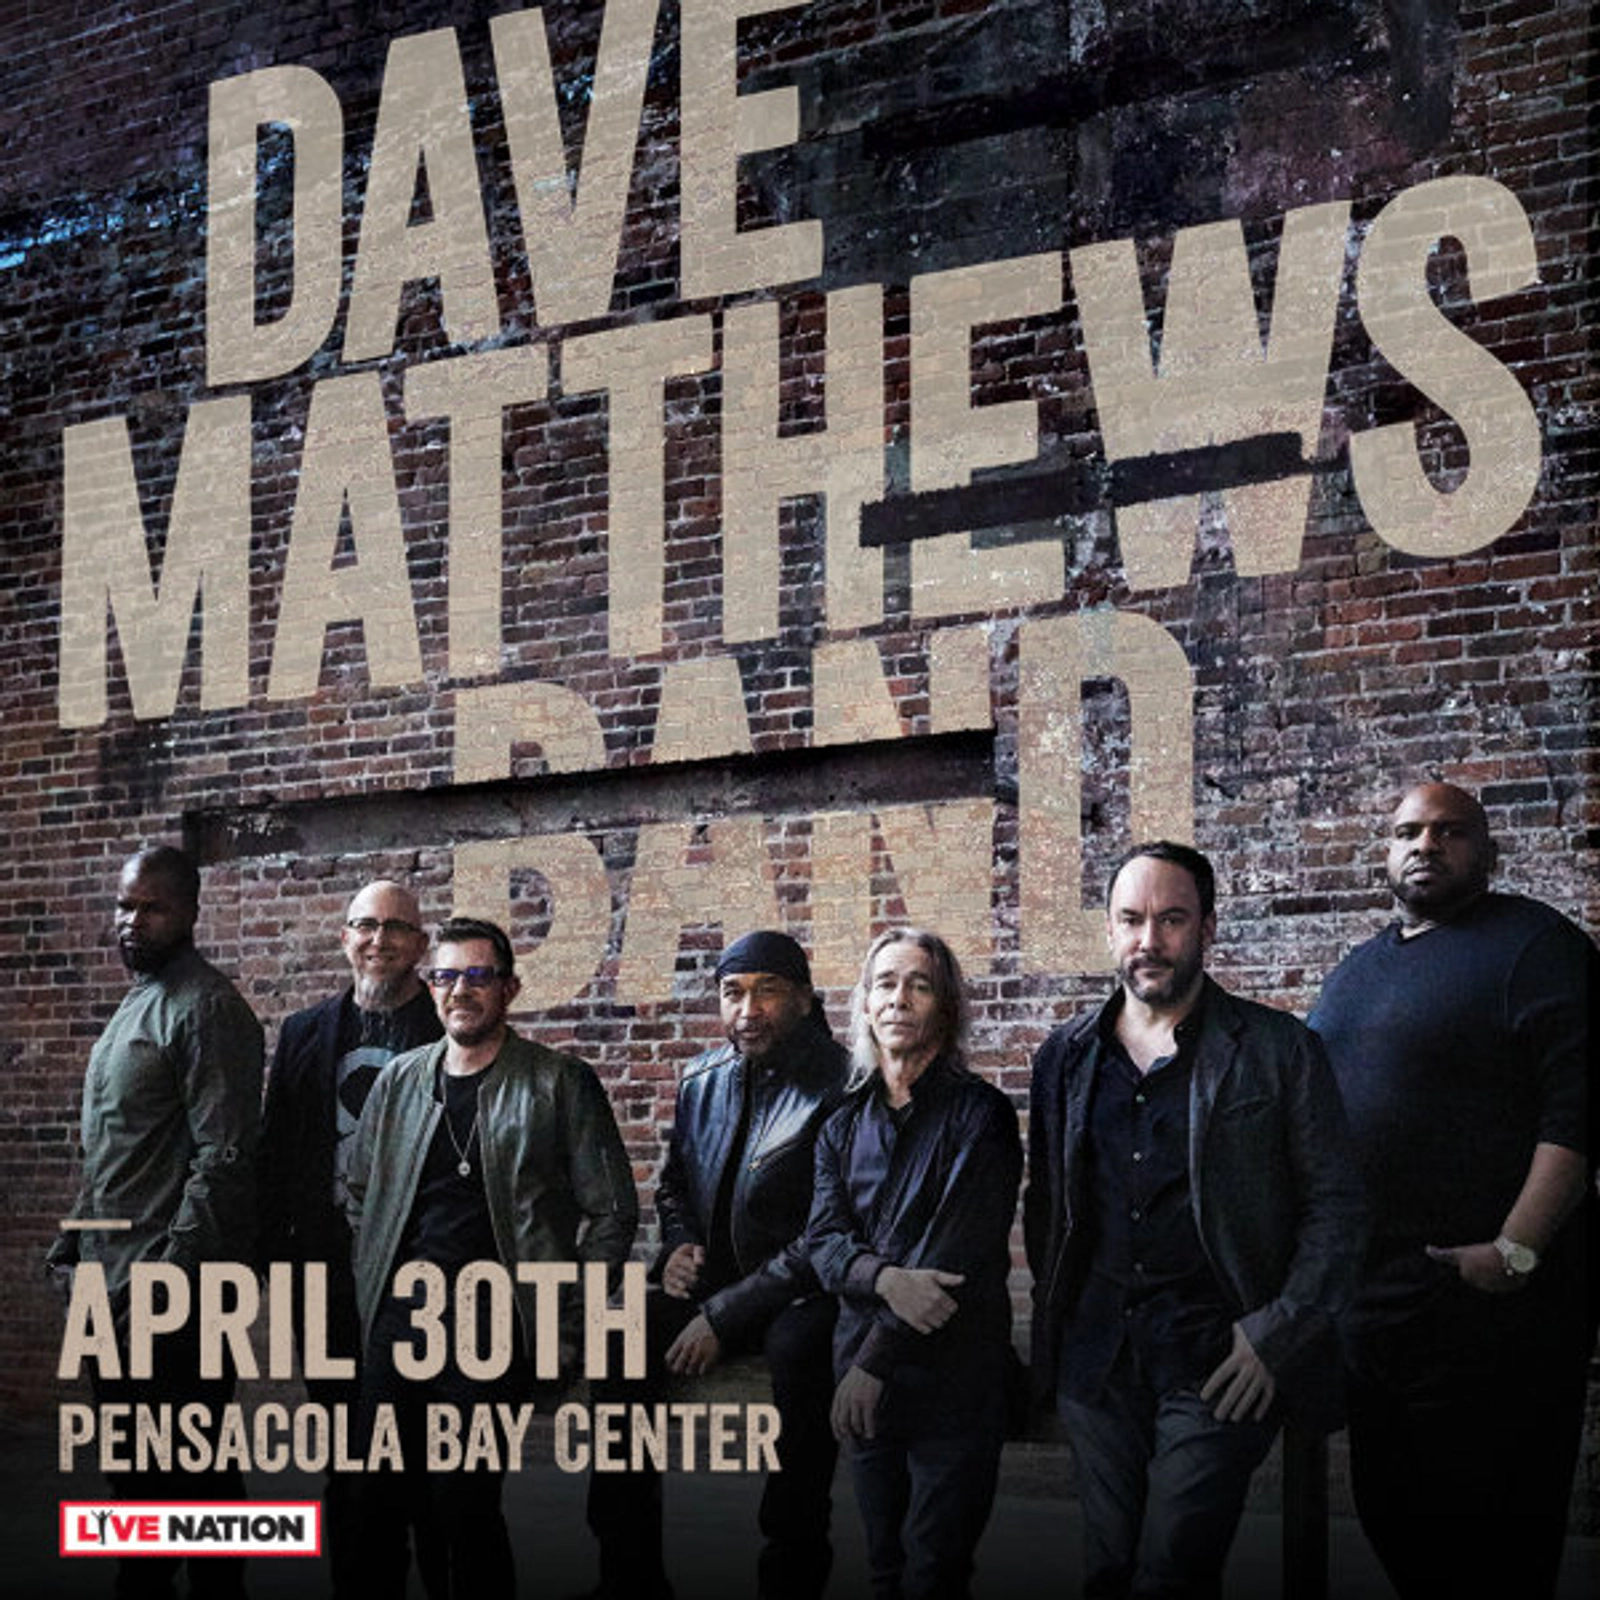 Win tickets to see The Dave Matthews Band! - Thumbnail Image